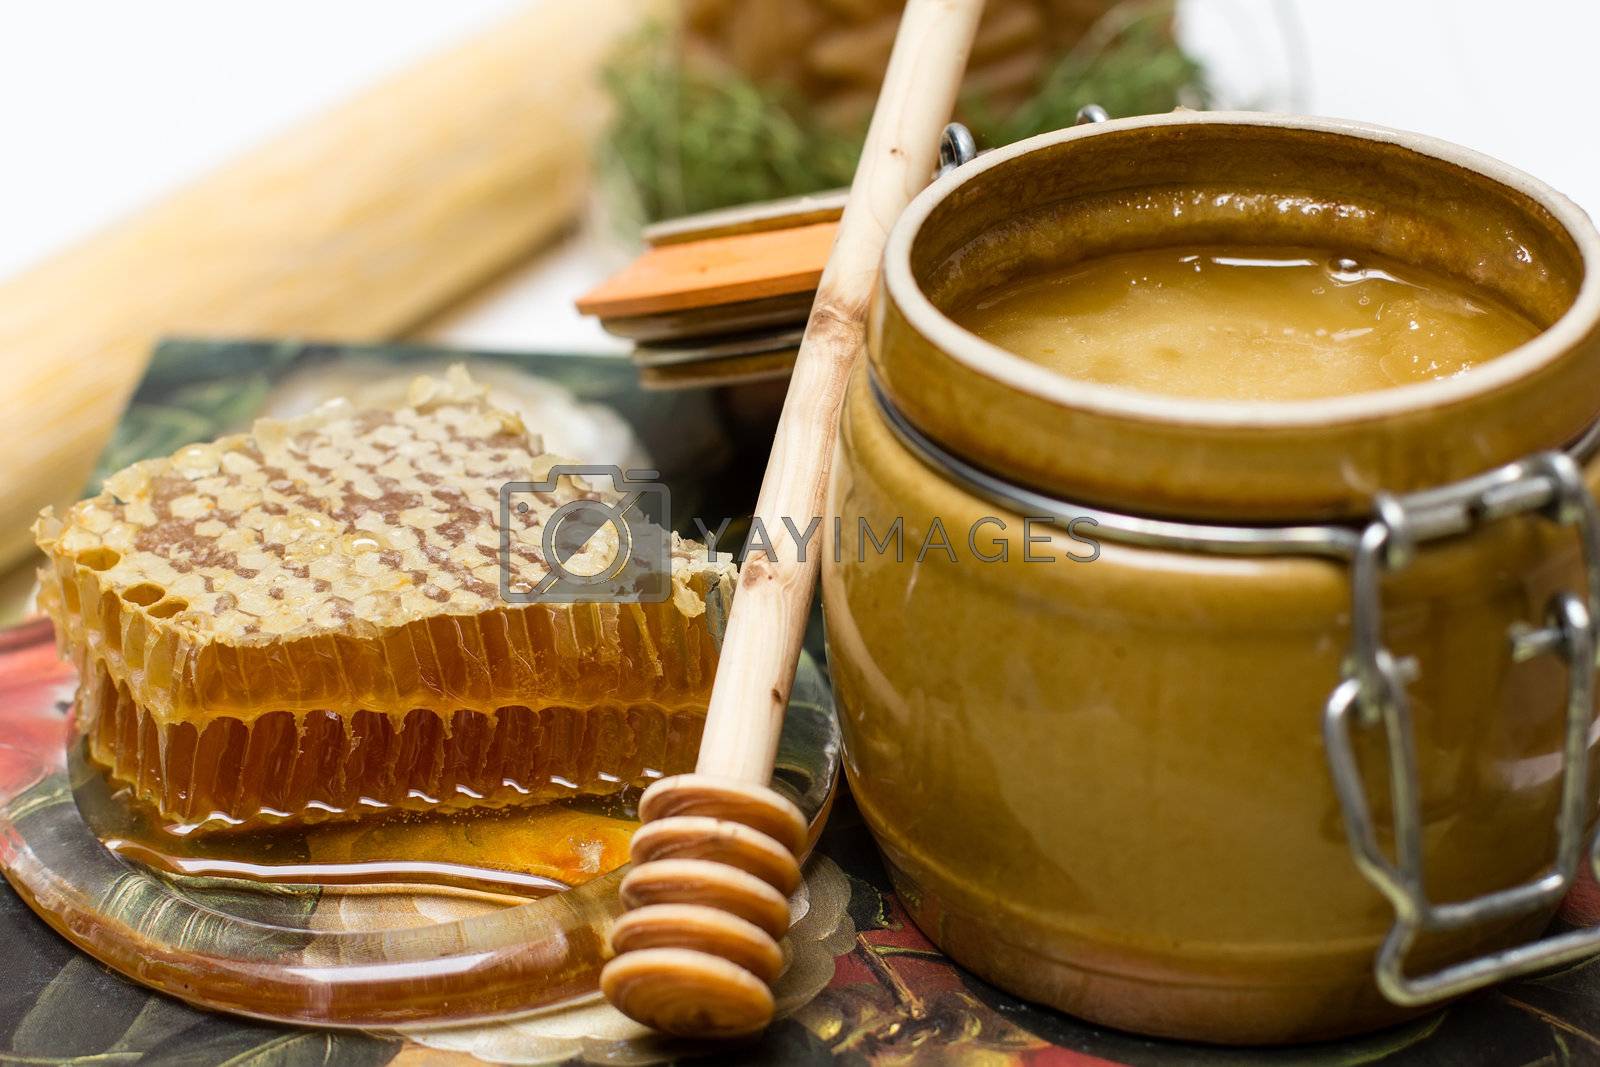 Royalty free image of Honey in pot, honeycomb and stick by lusjen_n